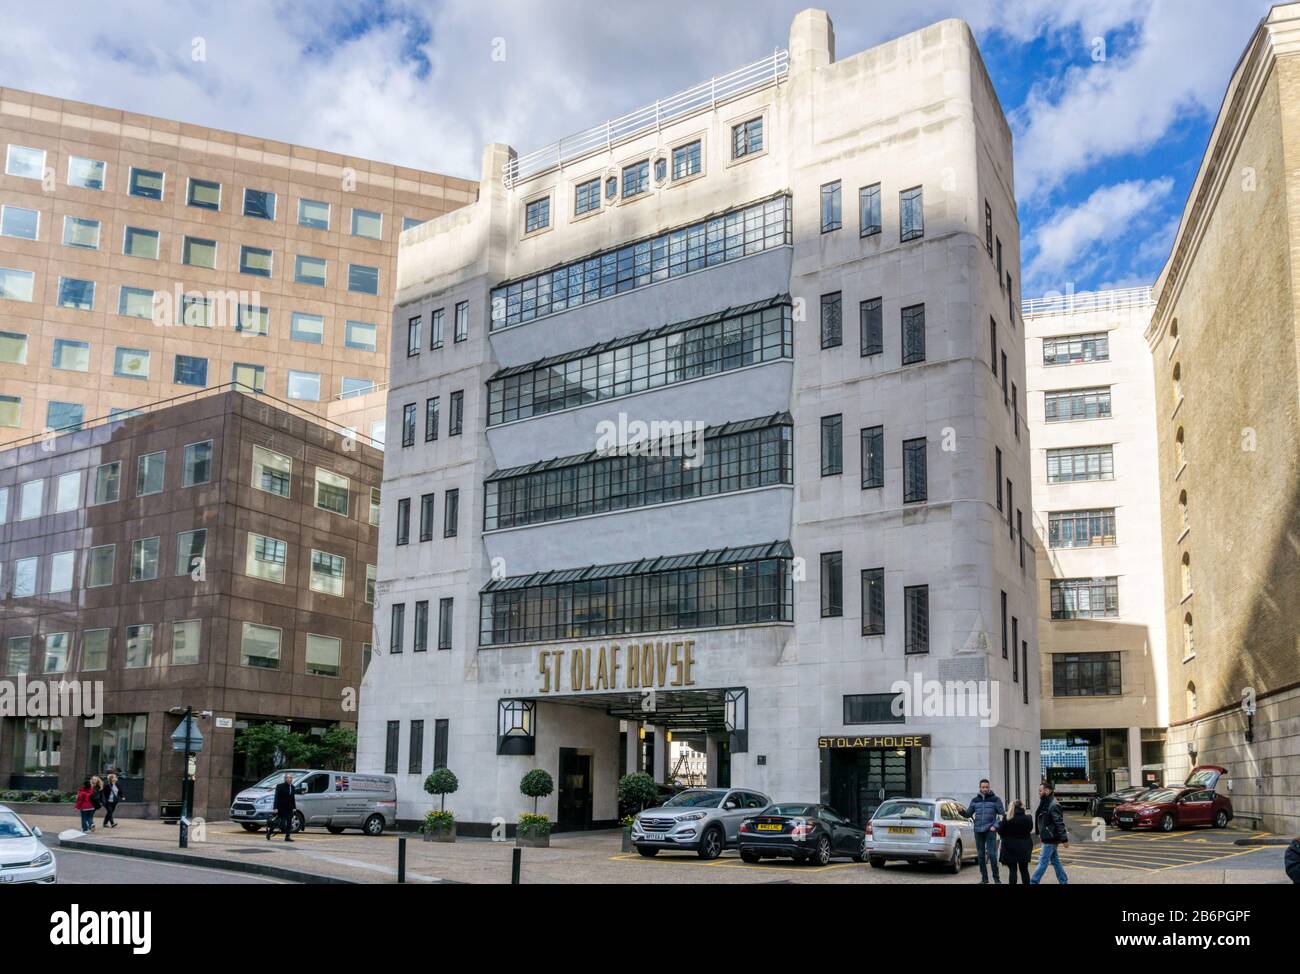 The art deco St Olaf House in Tooley Street was designed by Harry Stuart Goodhart-Rendel in 1928 as the head office for Hay's Wharf. Stock Photo